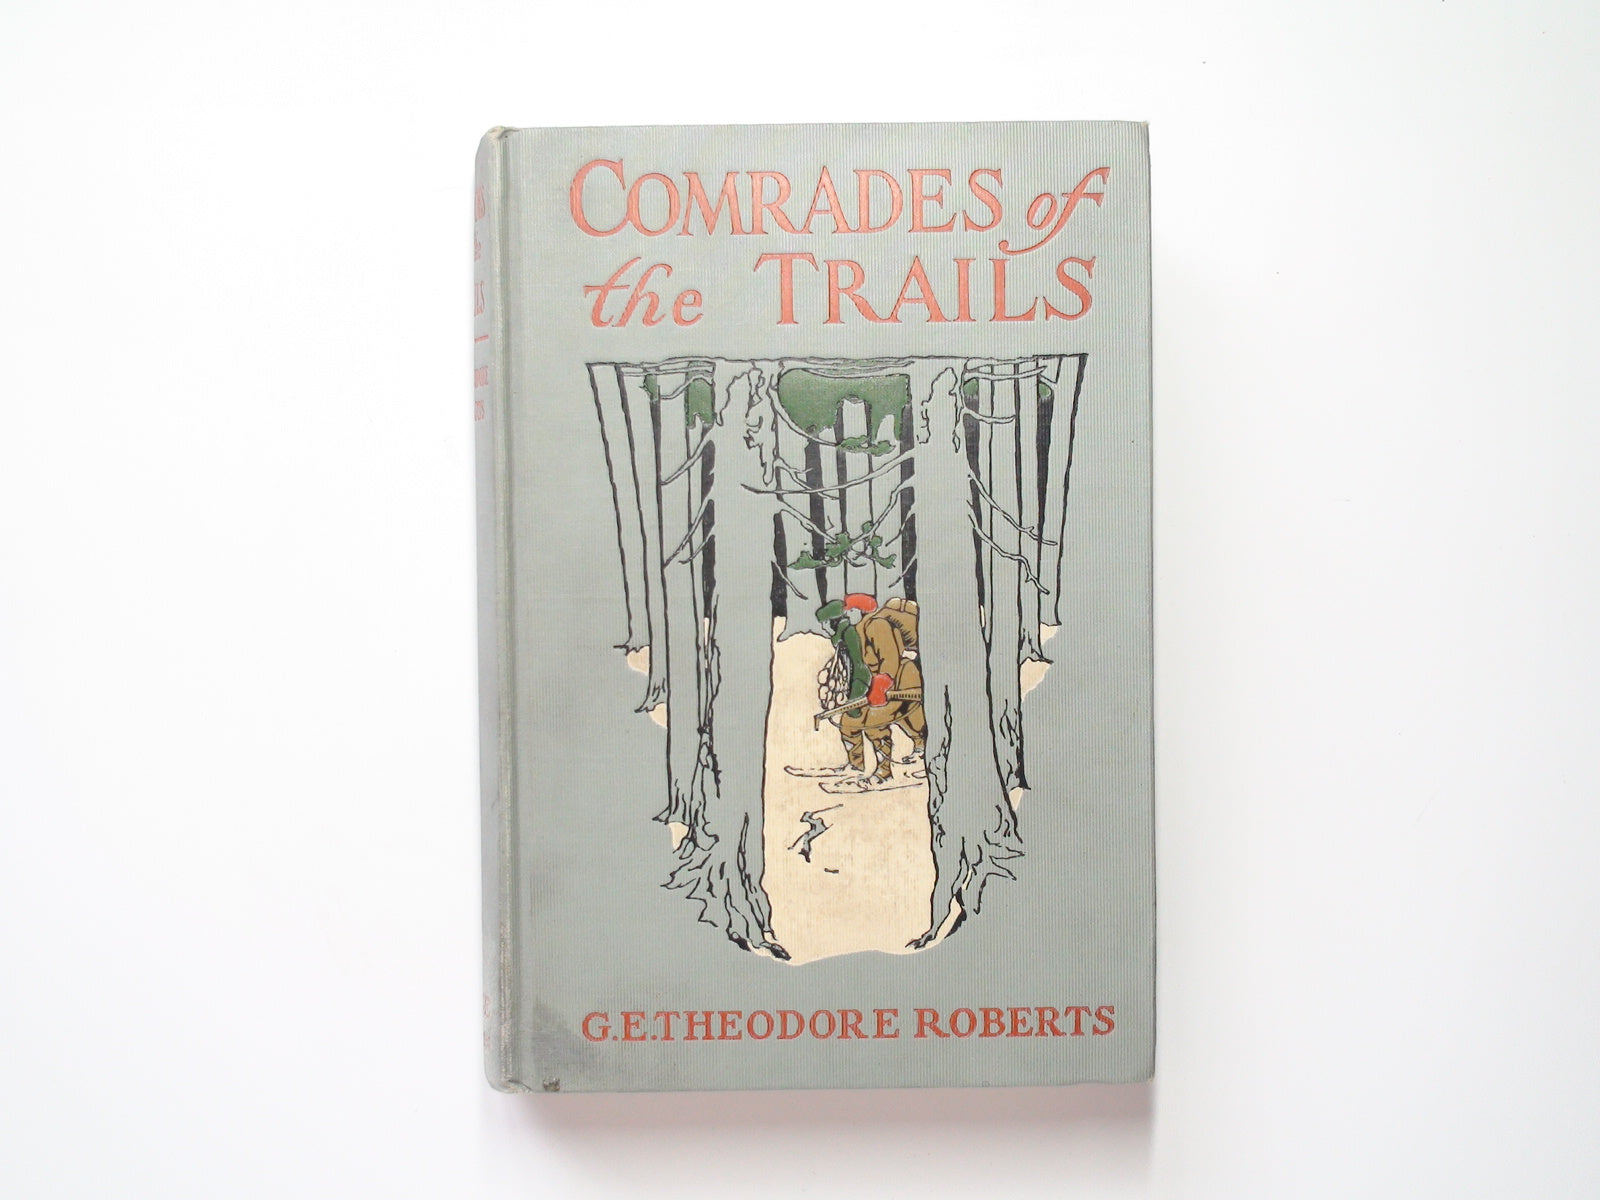 Comrades of the Trails, by G. E. Theodore Roberts, Illustrated, 1st Ed, 1910